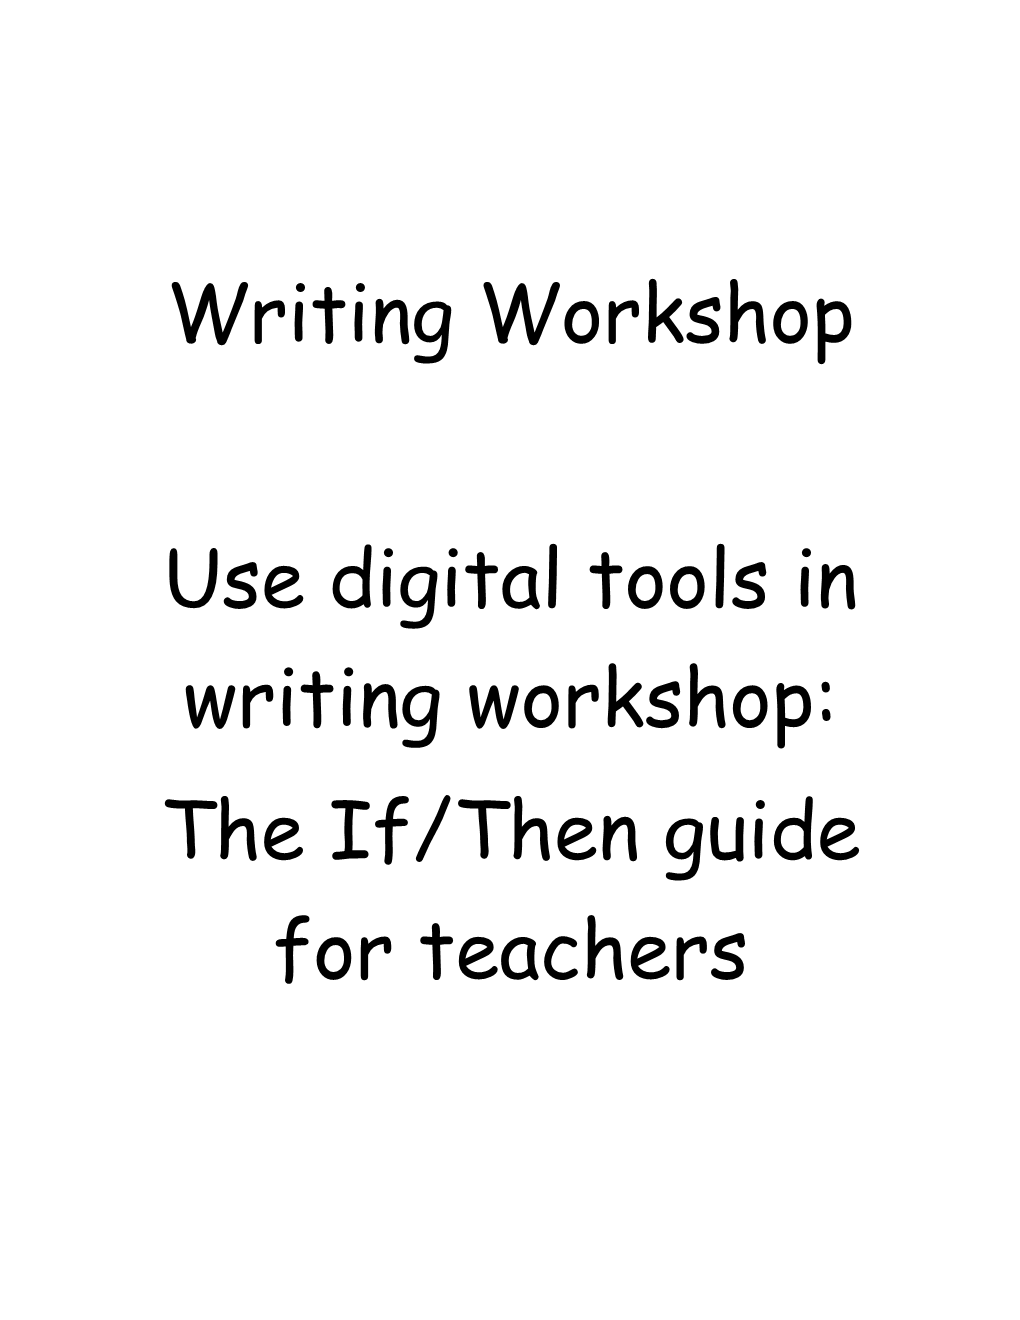 If You Want to Learn More About Writing Workshop